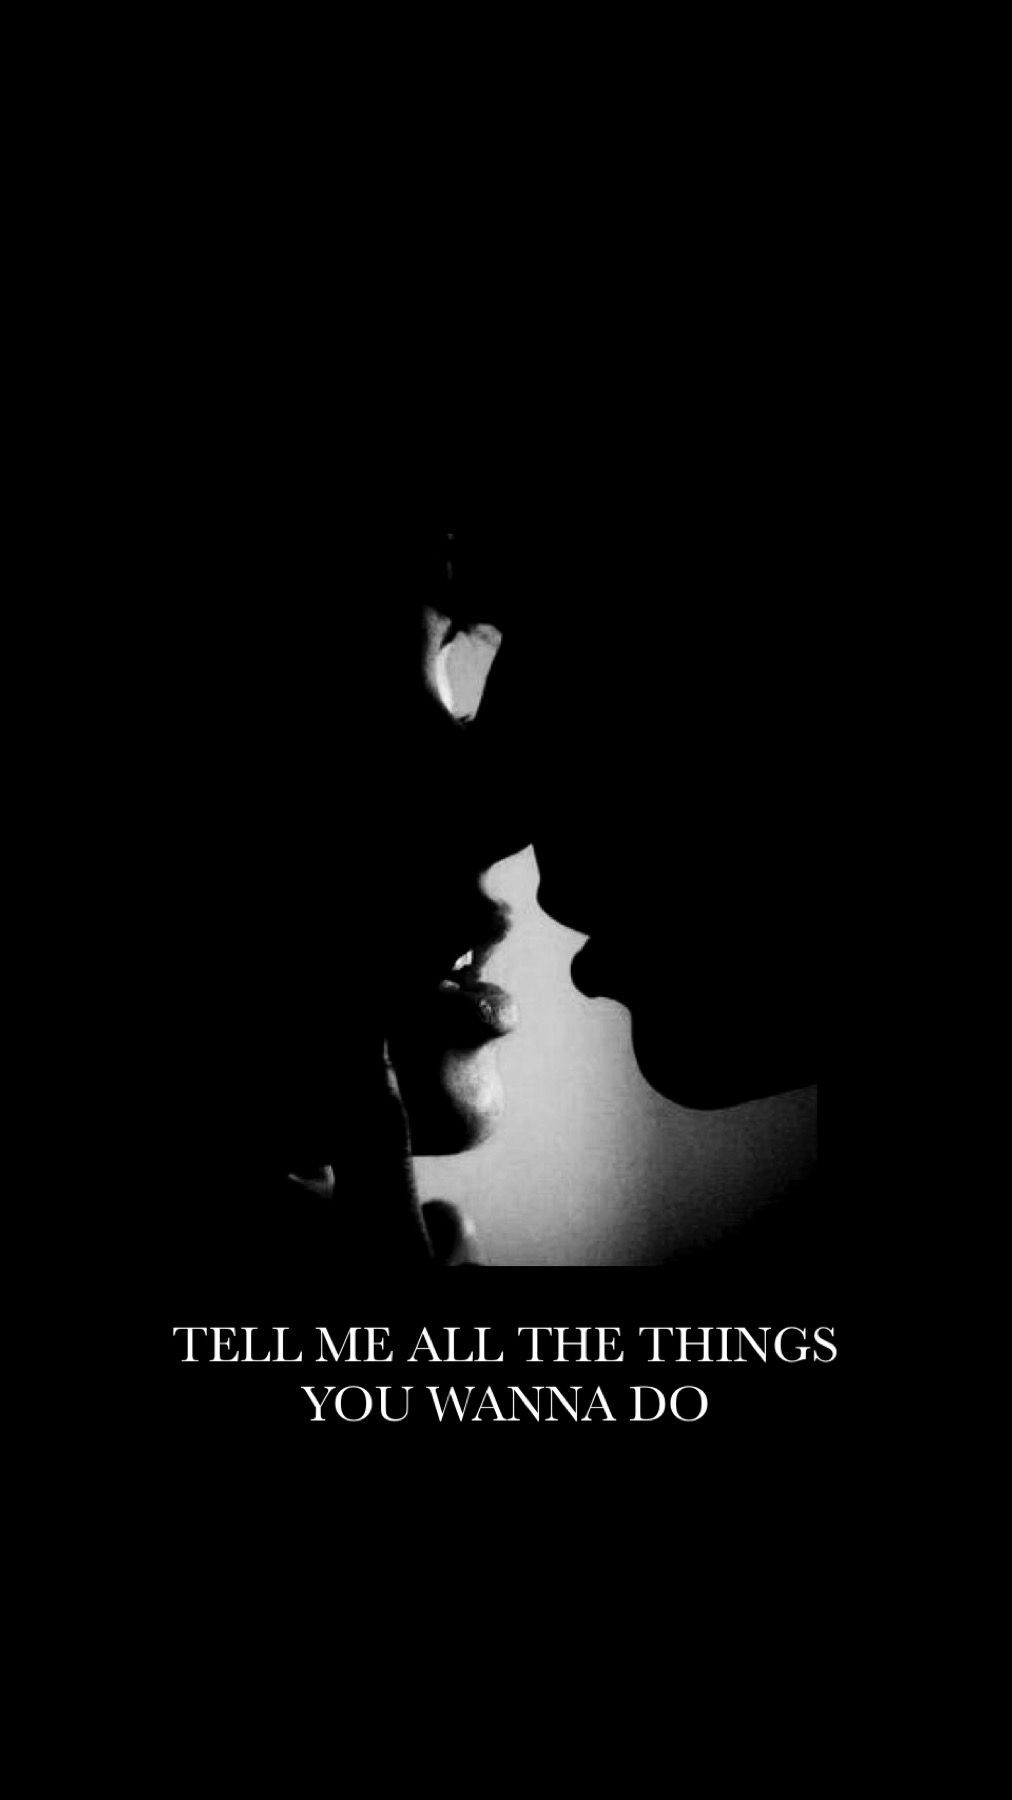 Tell me all the things you wanna do - Lana Del Rey